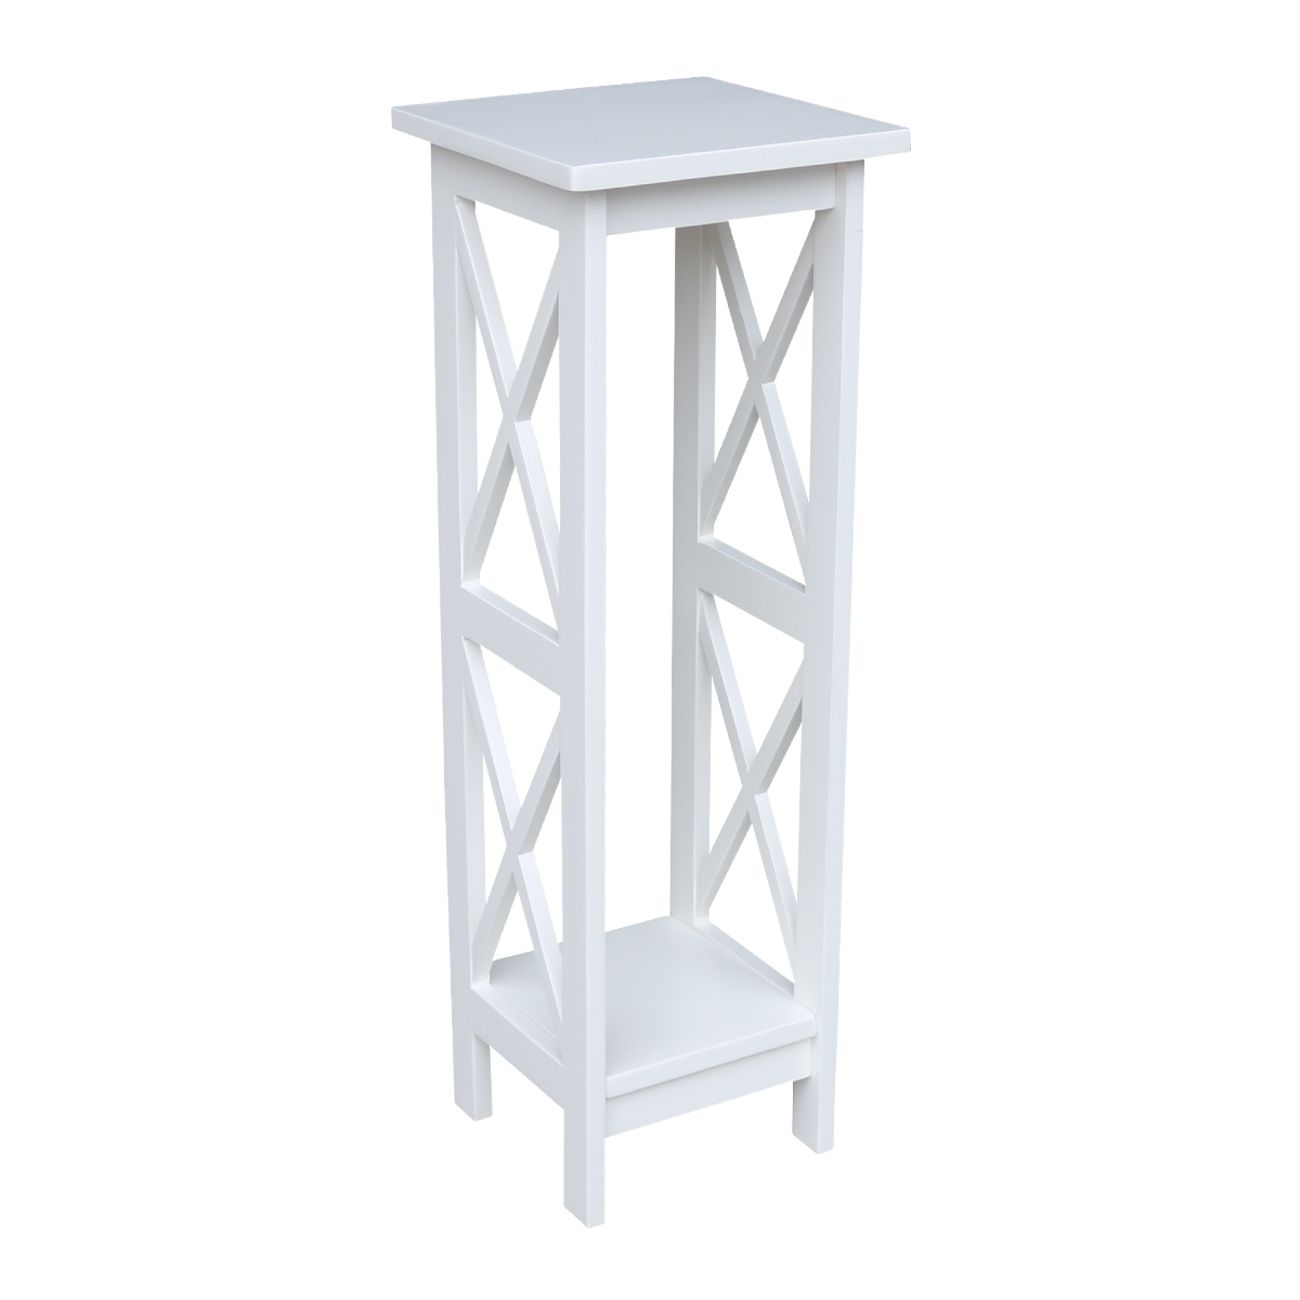 2018 International Concepts 36" X Sided Plant Stand – Walmart In 36 Inch Plant Stands (View 4 of 10)